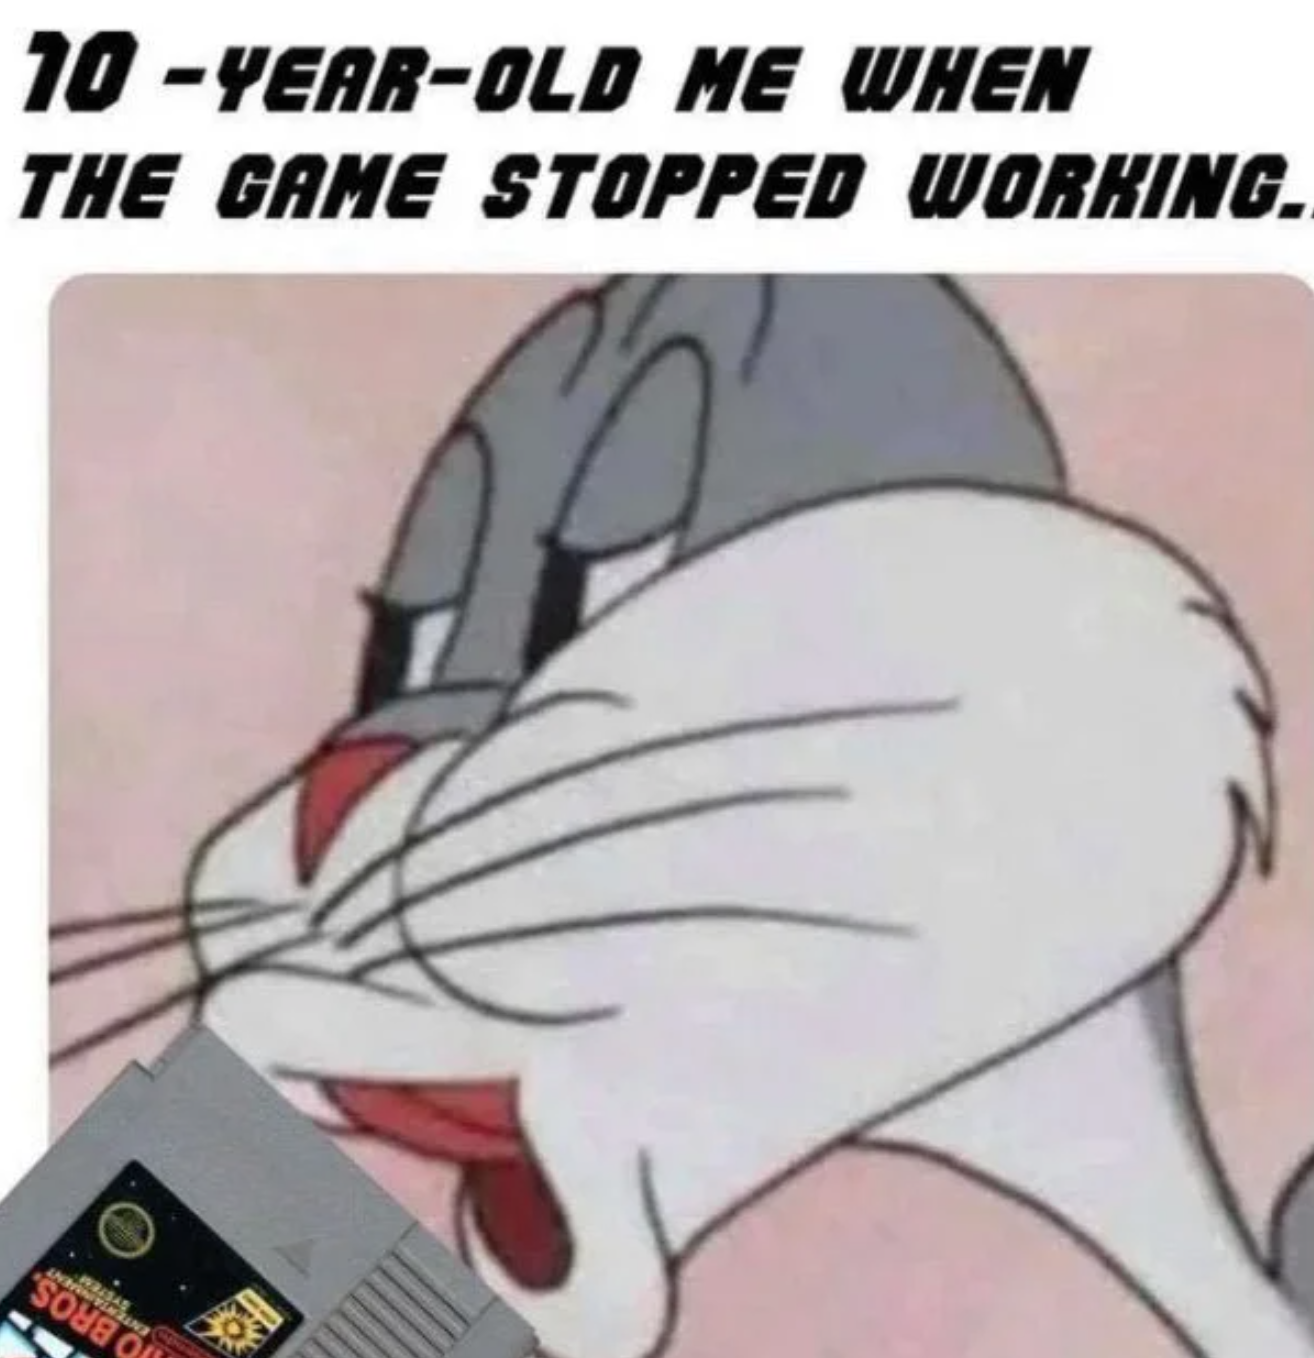 funny gaming memes - bug bunny no - 10 YearOld Me When The Game Stopped Working. sous